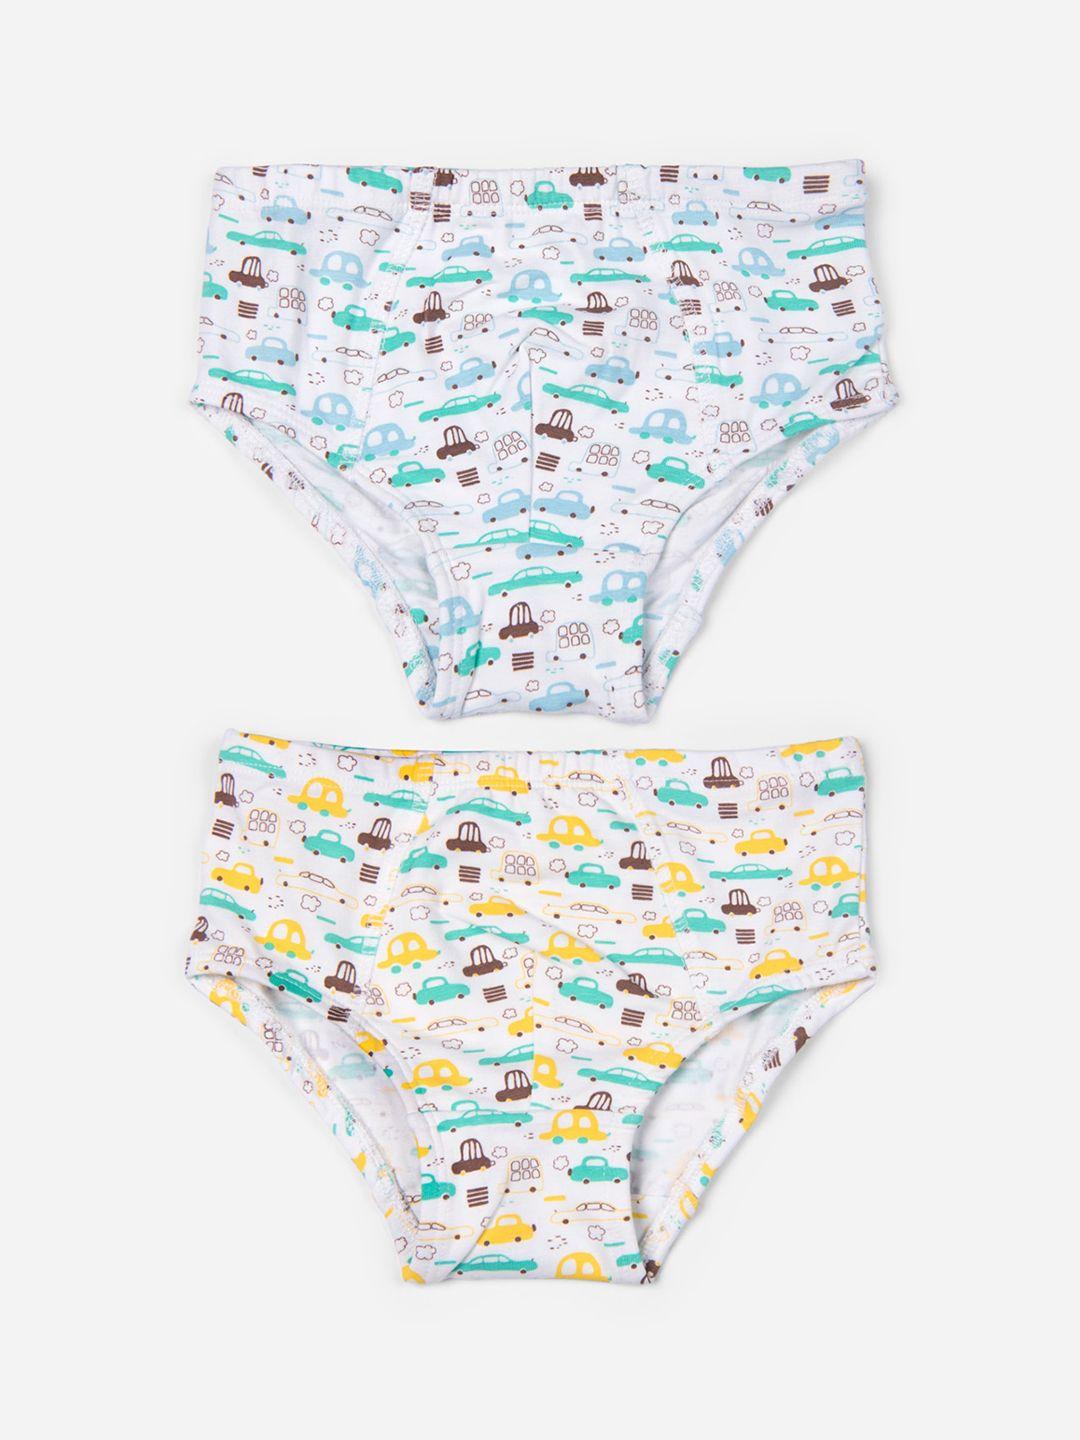 keebee-boys-pack-of-2-printed-organic-cotton-hipster-briefs-bbrief_rc_1_2